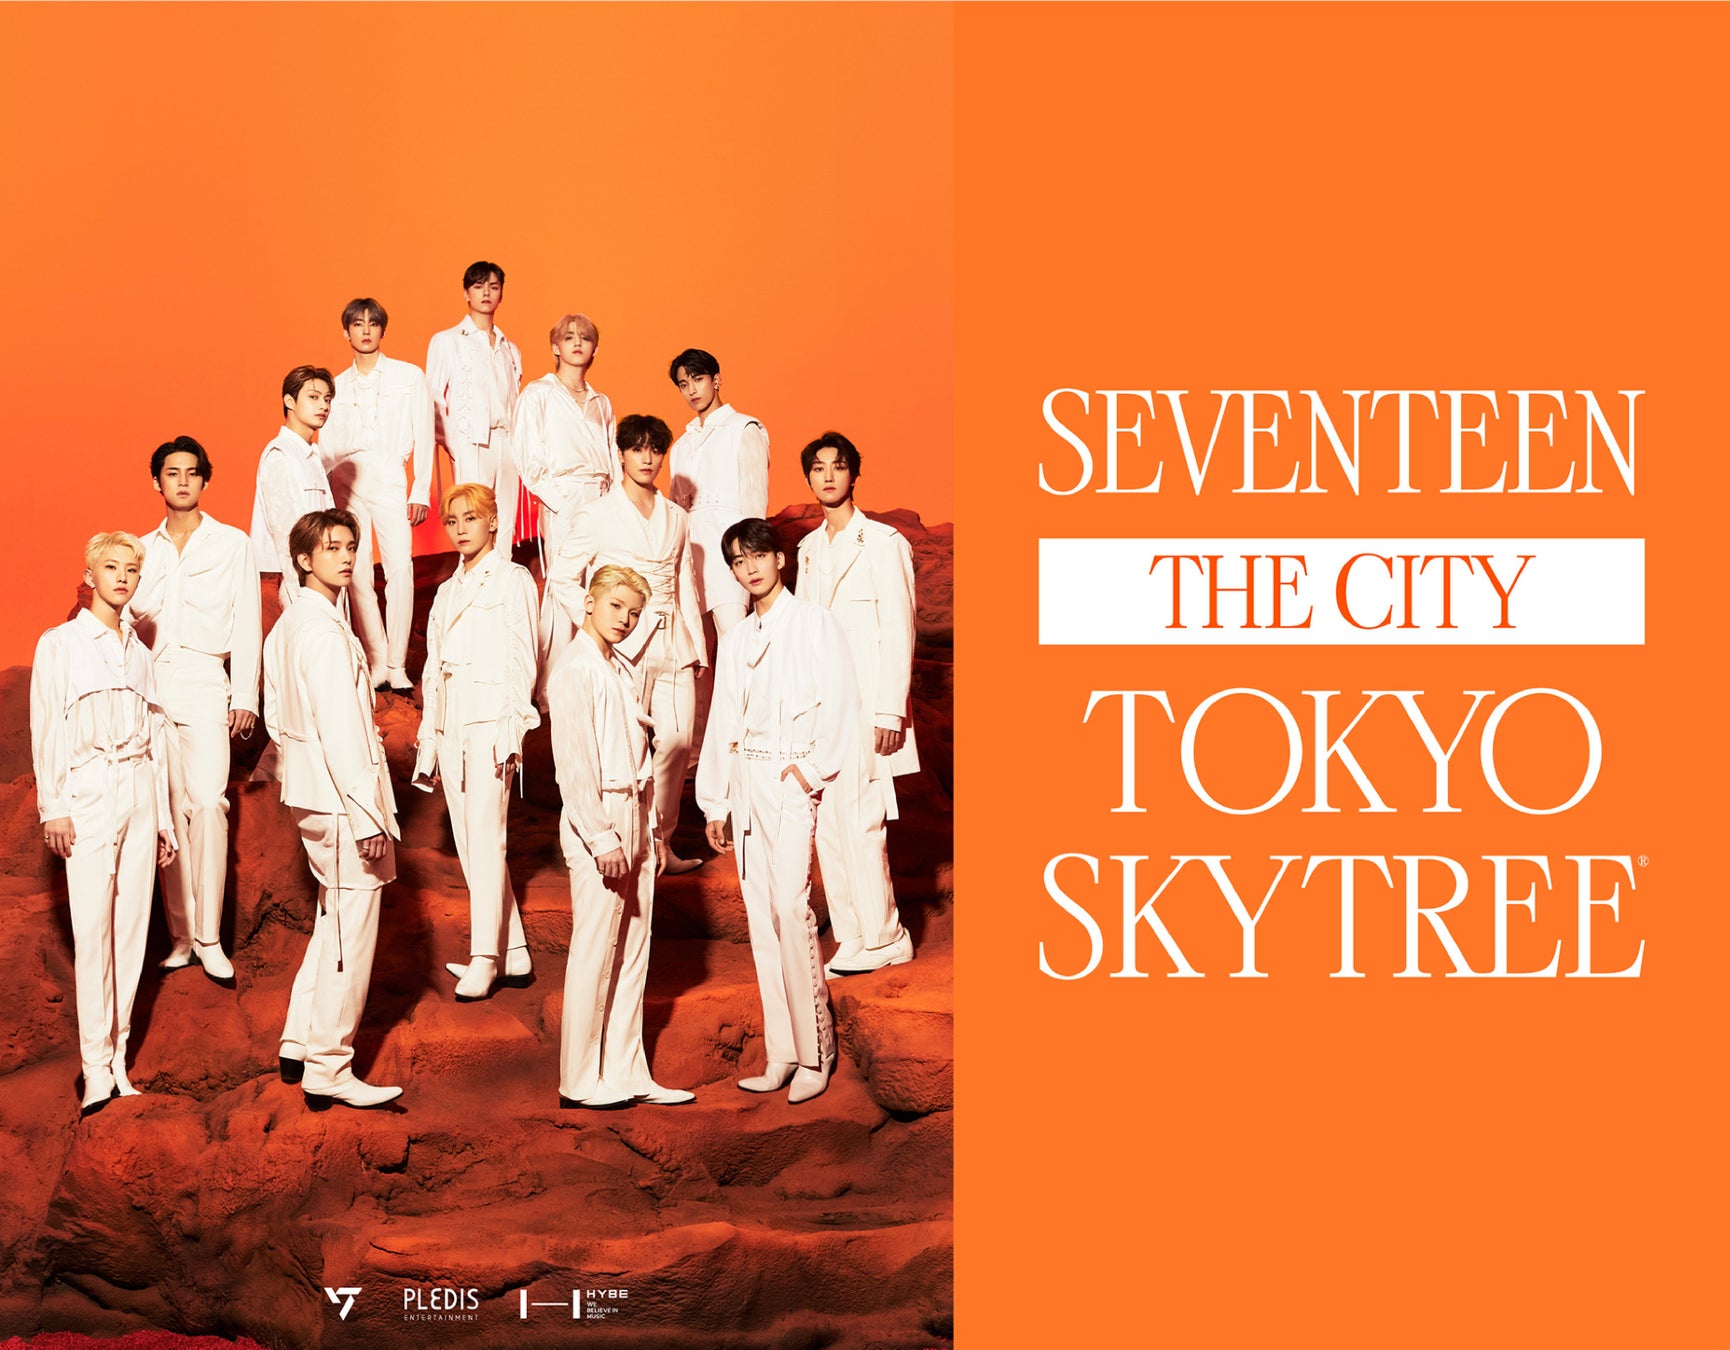 SEVENTEEN THE CITY TOKYO SKYTREE(R) イベント詳細が決定！のサブ画像1_「SEVENTEEN THE CITY TOKYO SKYTREE(R)」キービジュアル